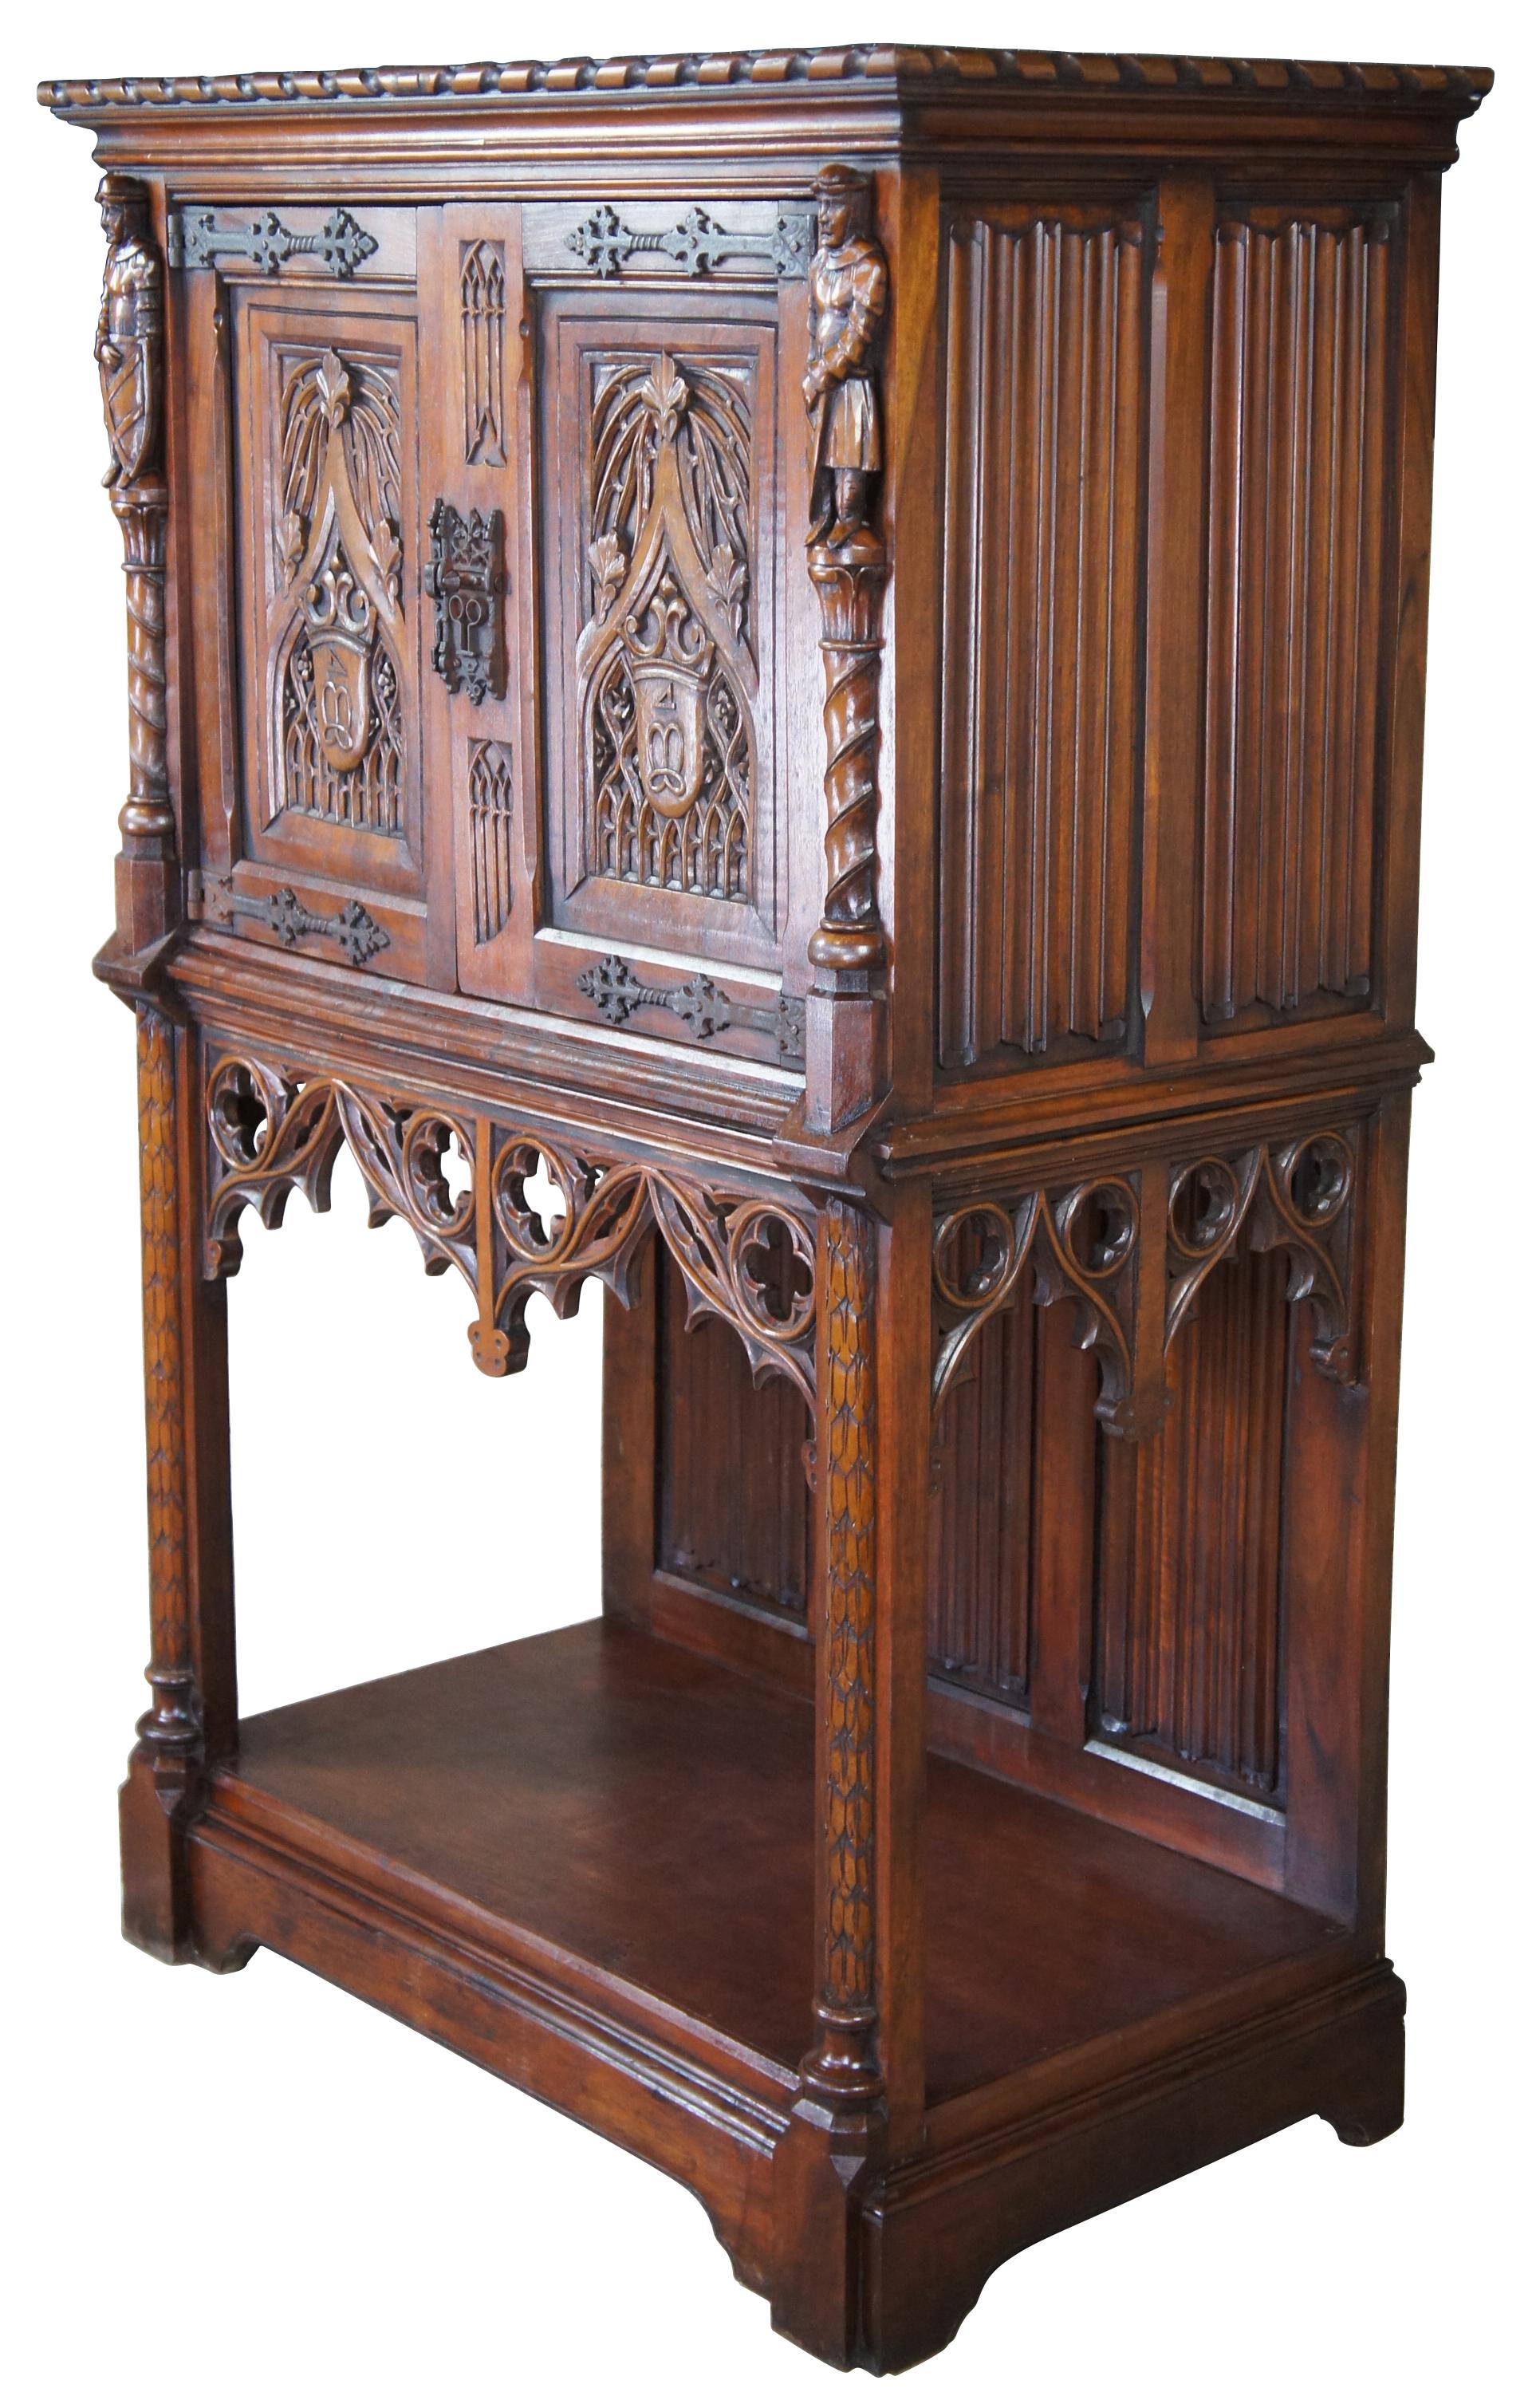 Antique English Gothic revival court cupboard or secretary desk, circa late 1800s. Made of Quartersawn Oak featuring figural columns, panelled siding and an arched pierced apron. The two doors are heavily detailed with an embowed design, crest and